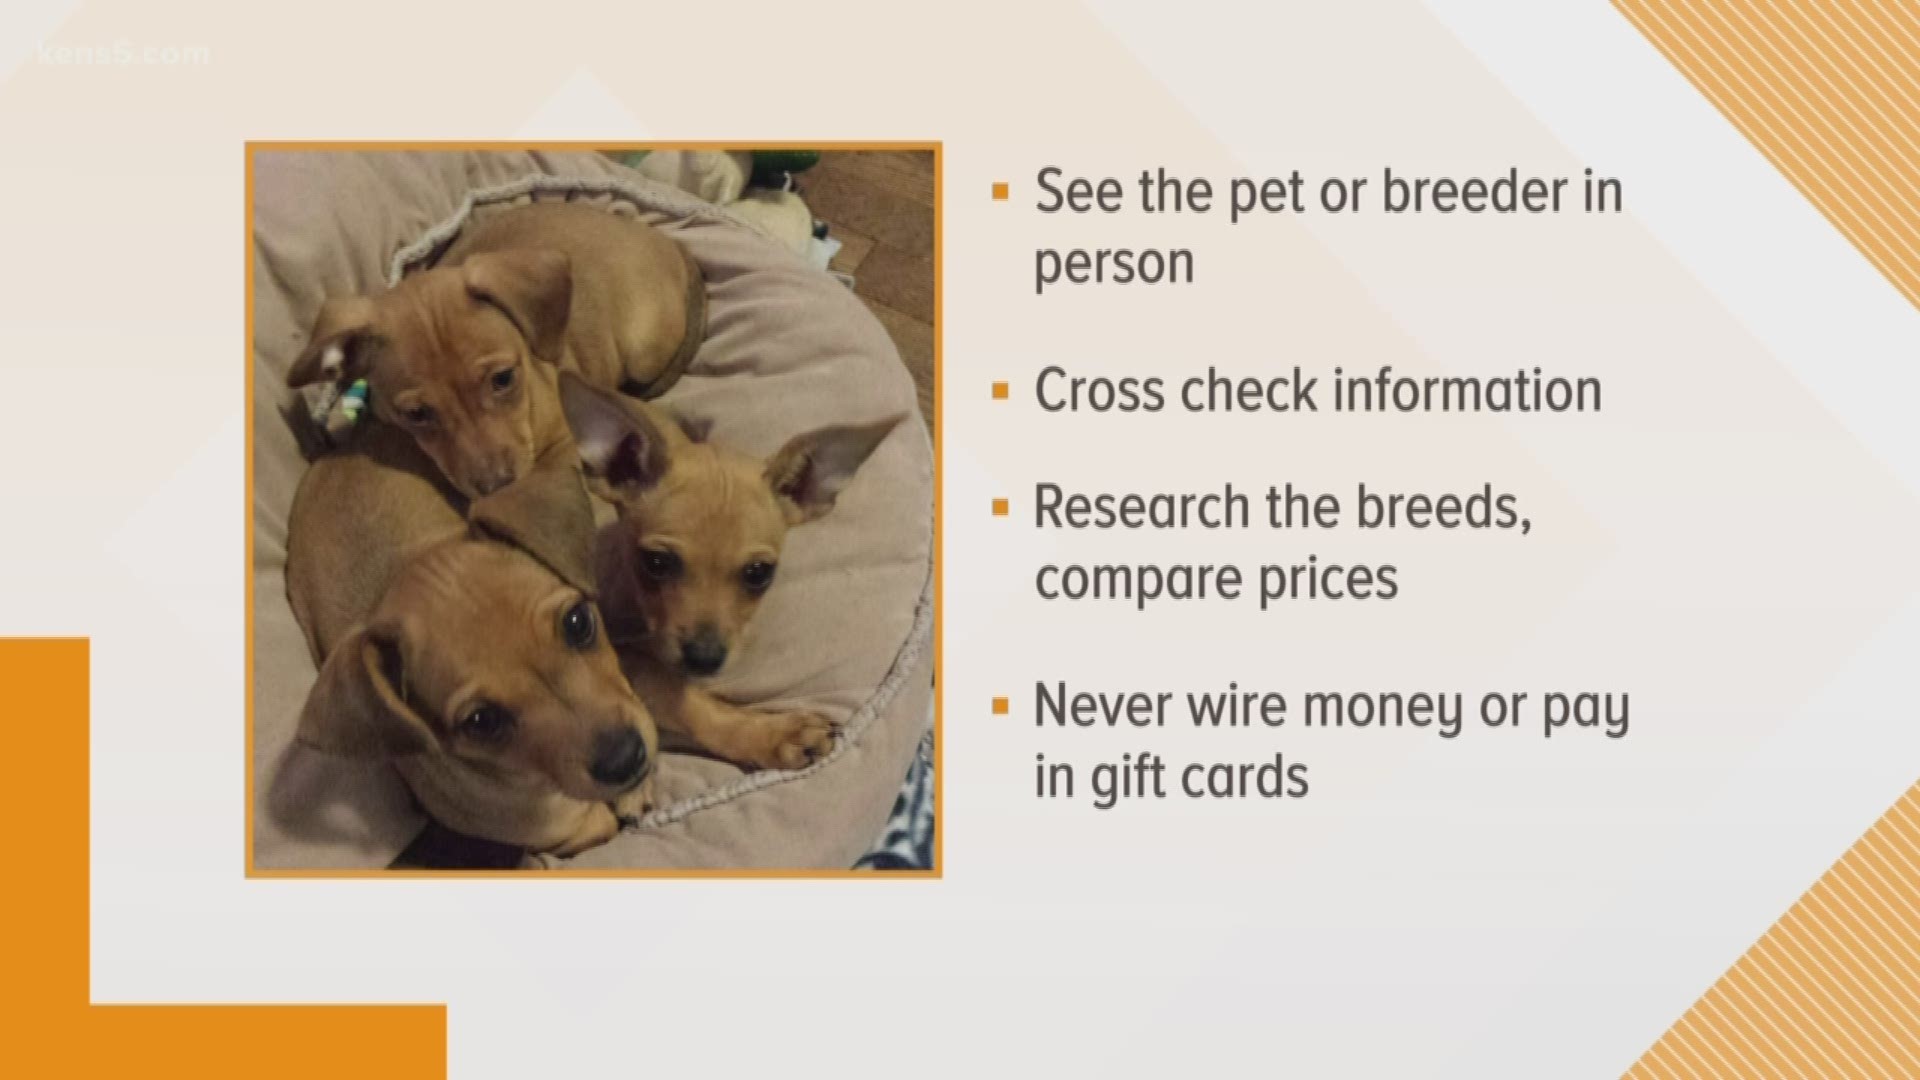 Online searches are more and more popular when it comes to finding the right pet. But someone could be looking to steal more than just your holiday joy.